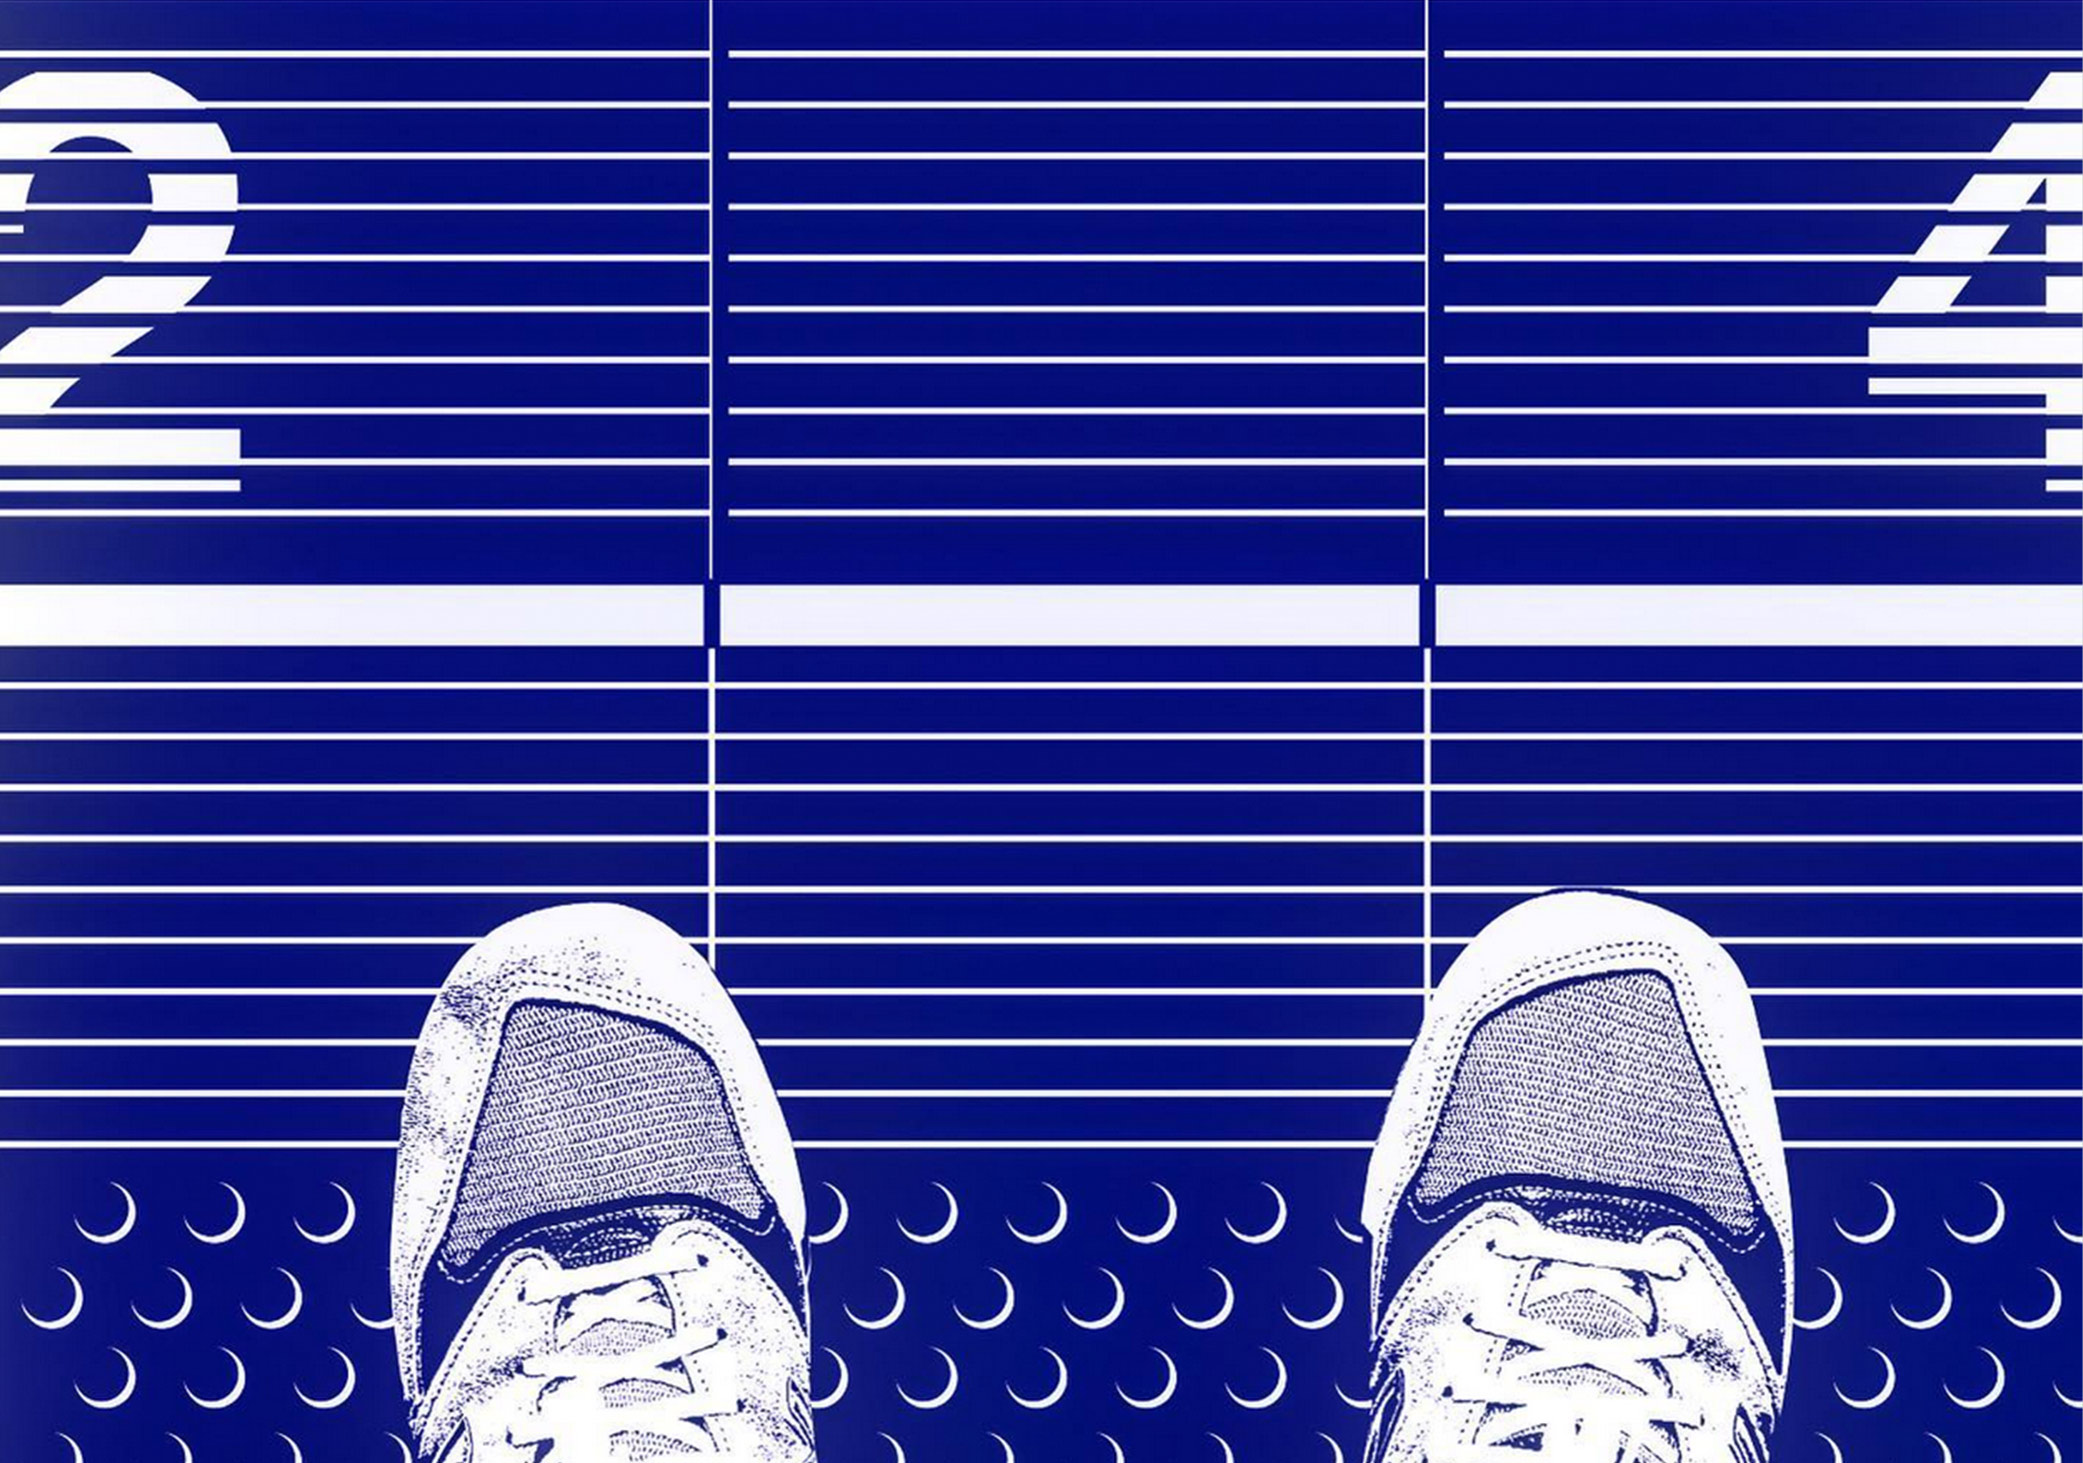 Experimental poster, top view of trainers on train platform edited to have a mono blue and white style